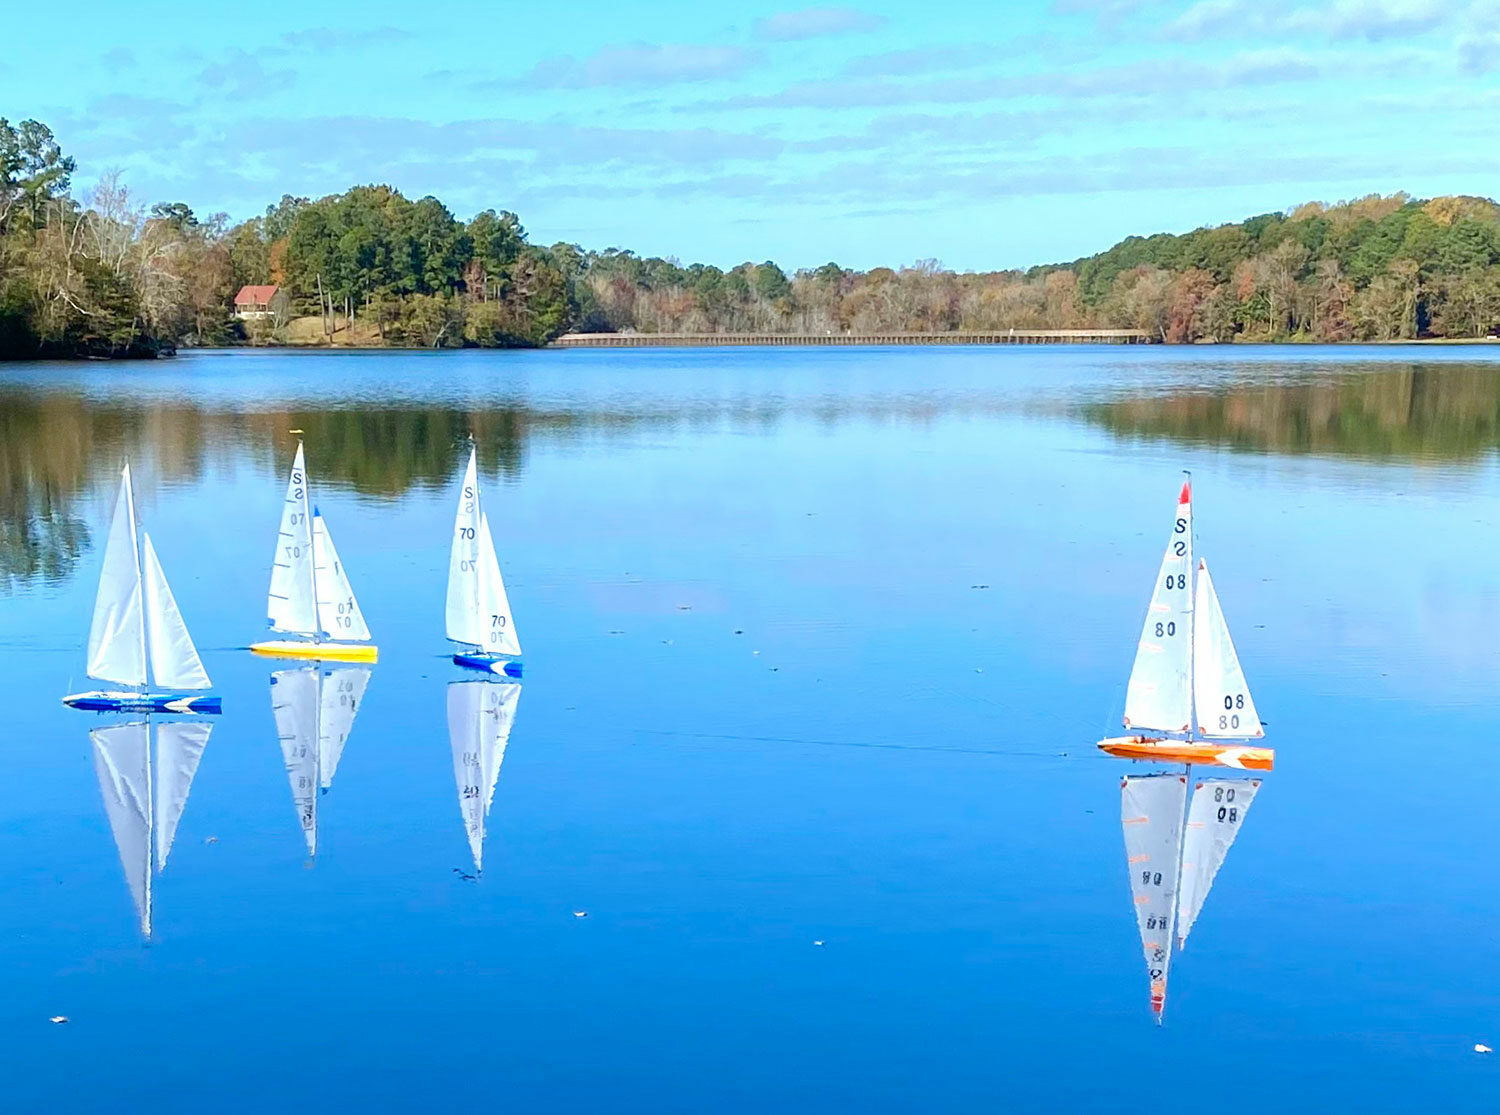 Kayaks with sails on lake in Wilson, NC - Discover Wilson